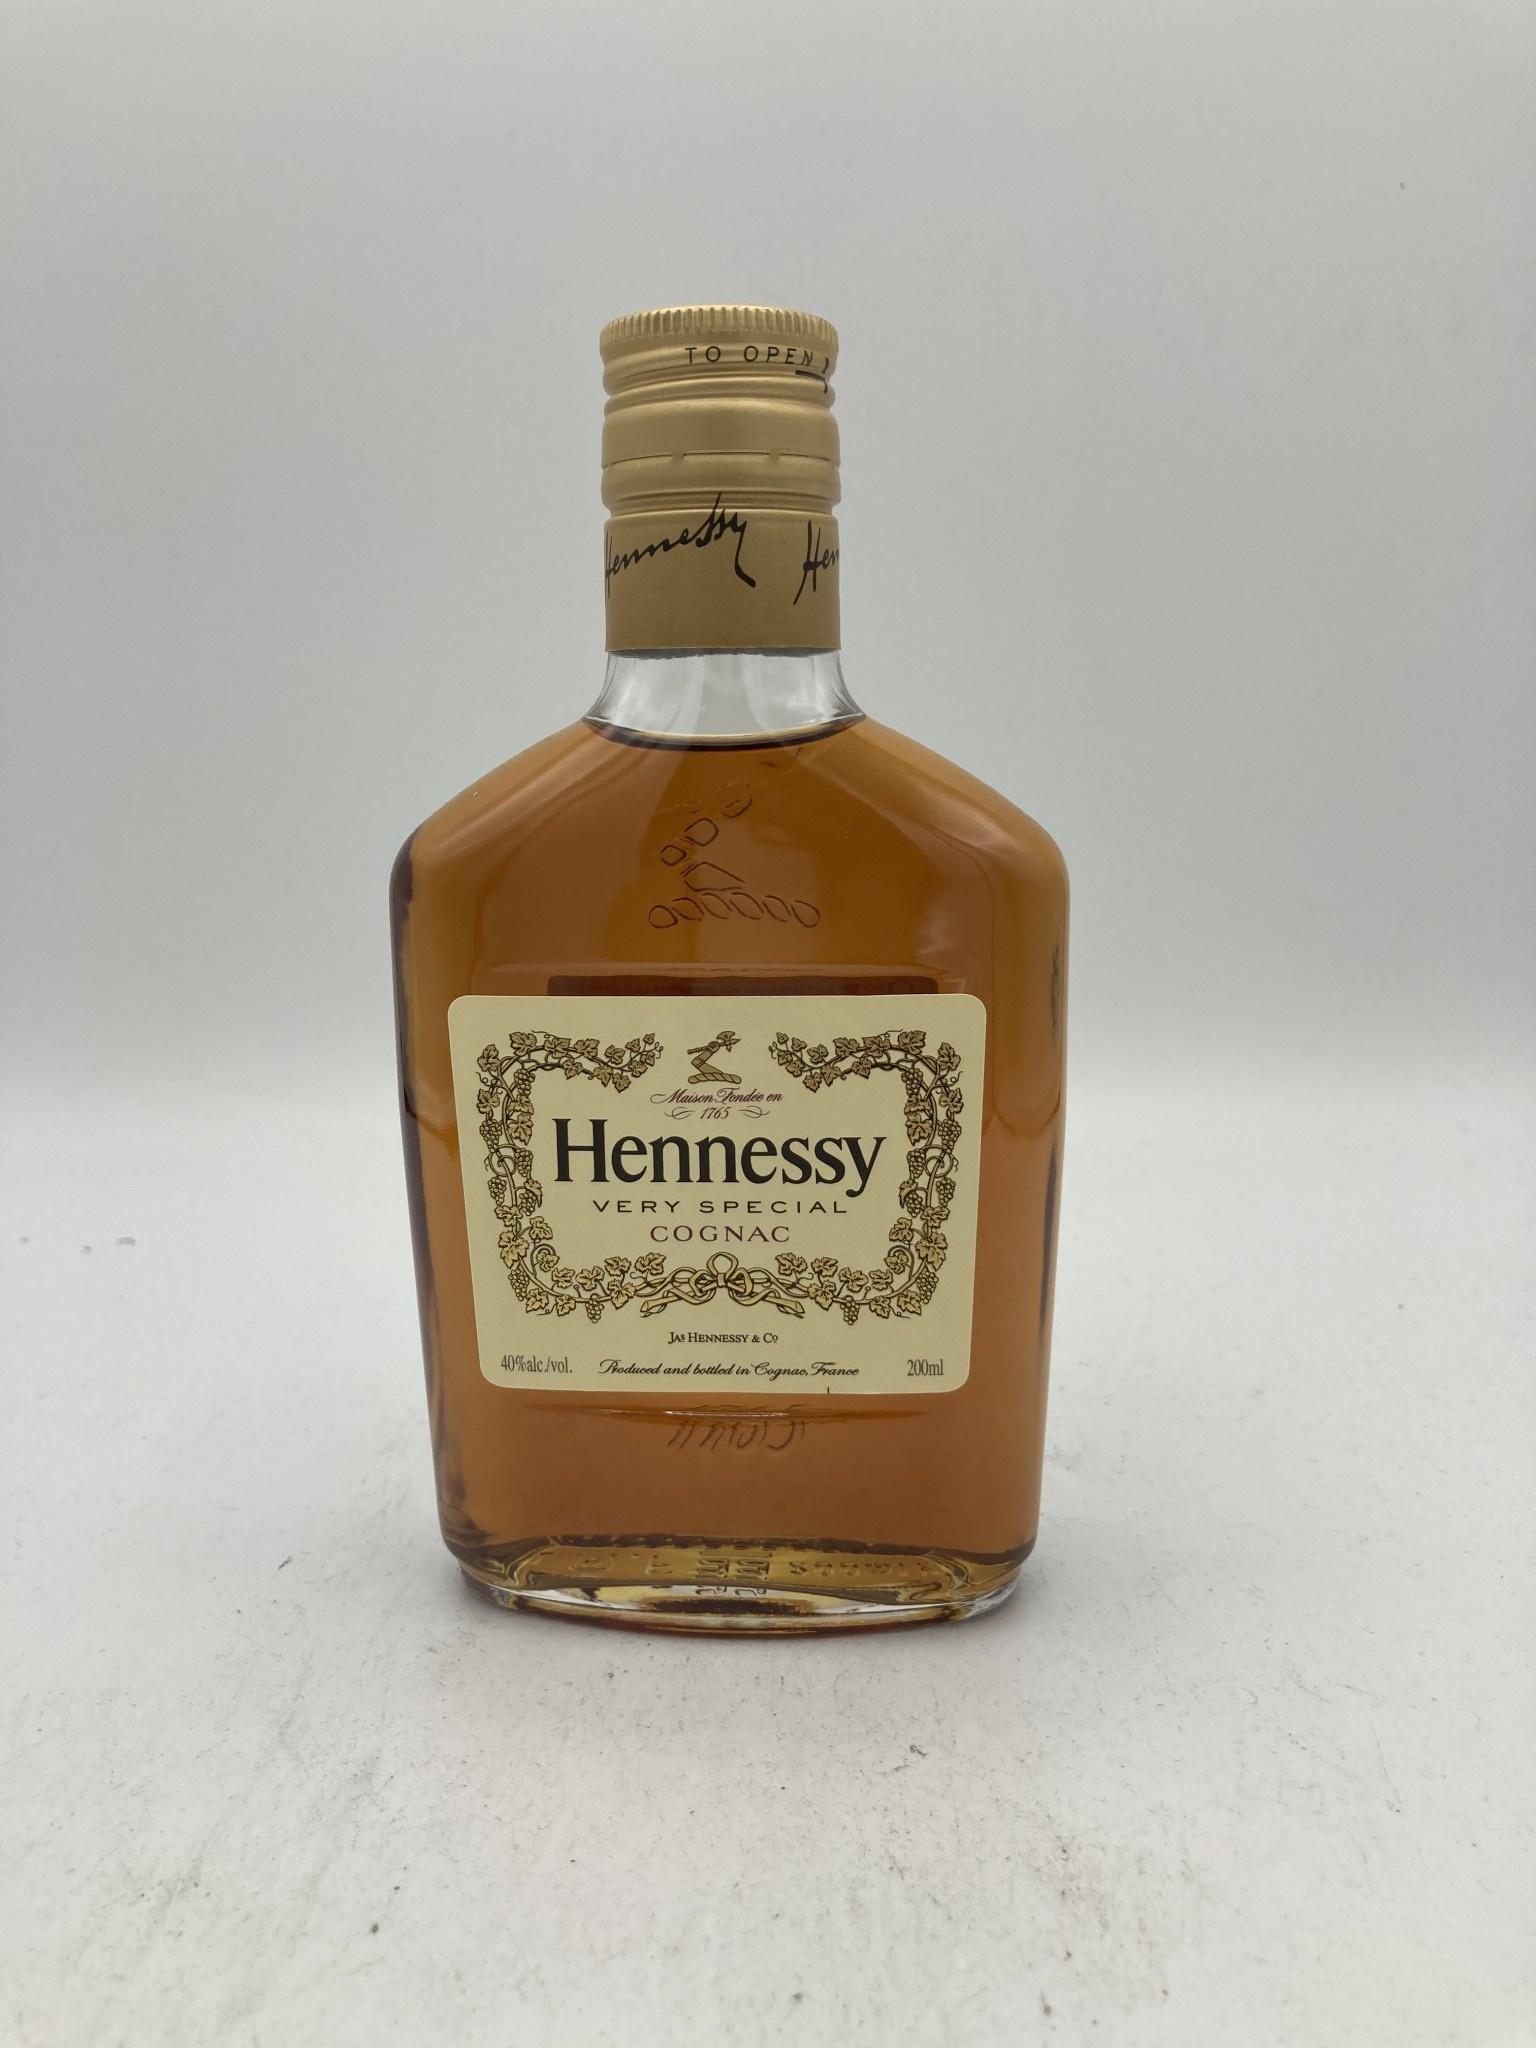 Hennessy cognac very special 40% abv 80 proof 200ml - Holly Main liquor